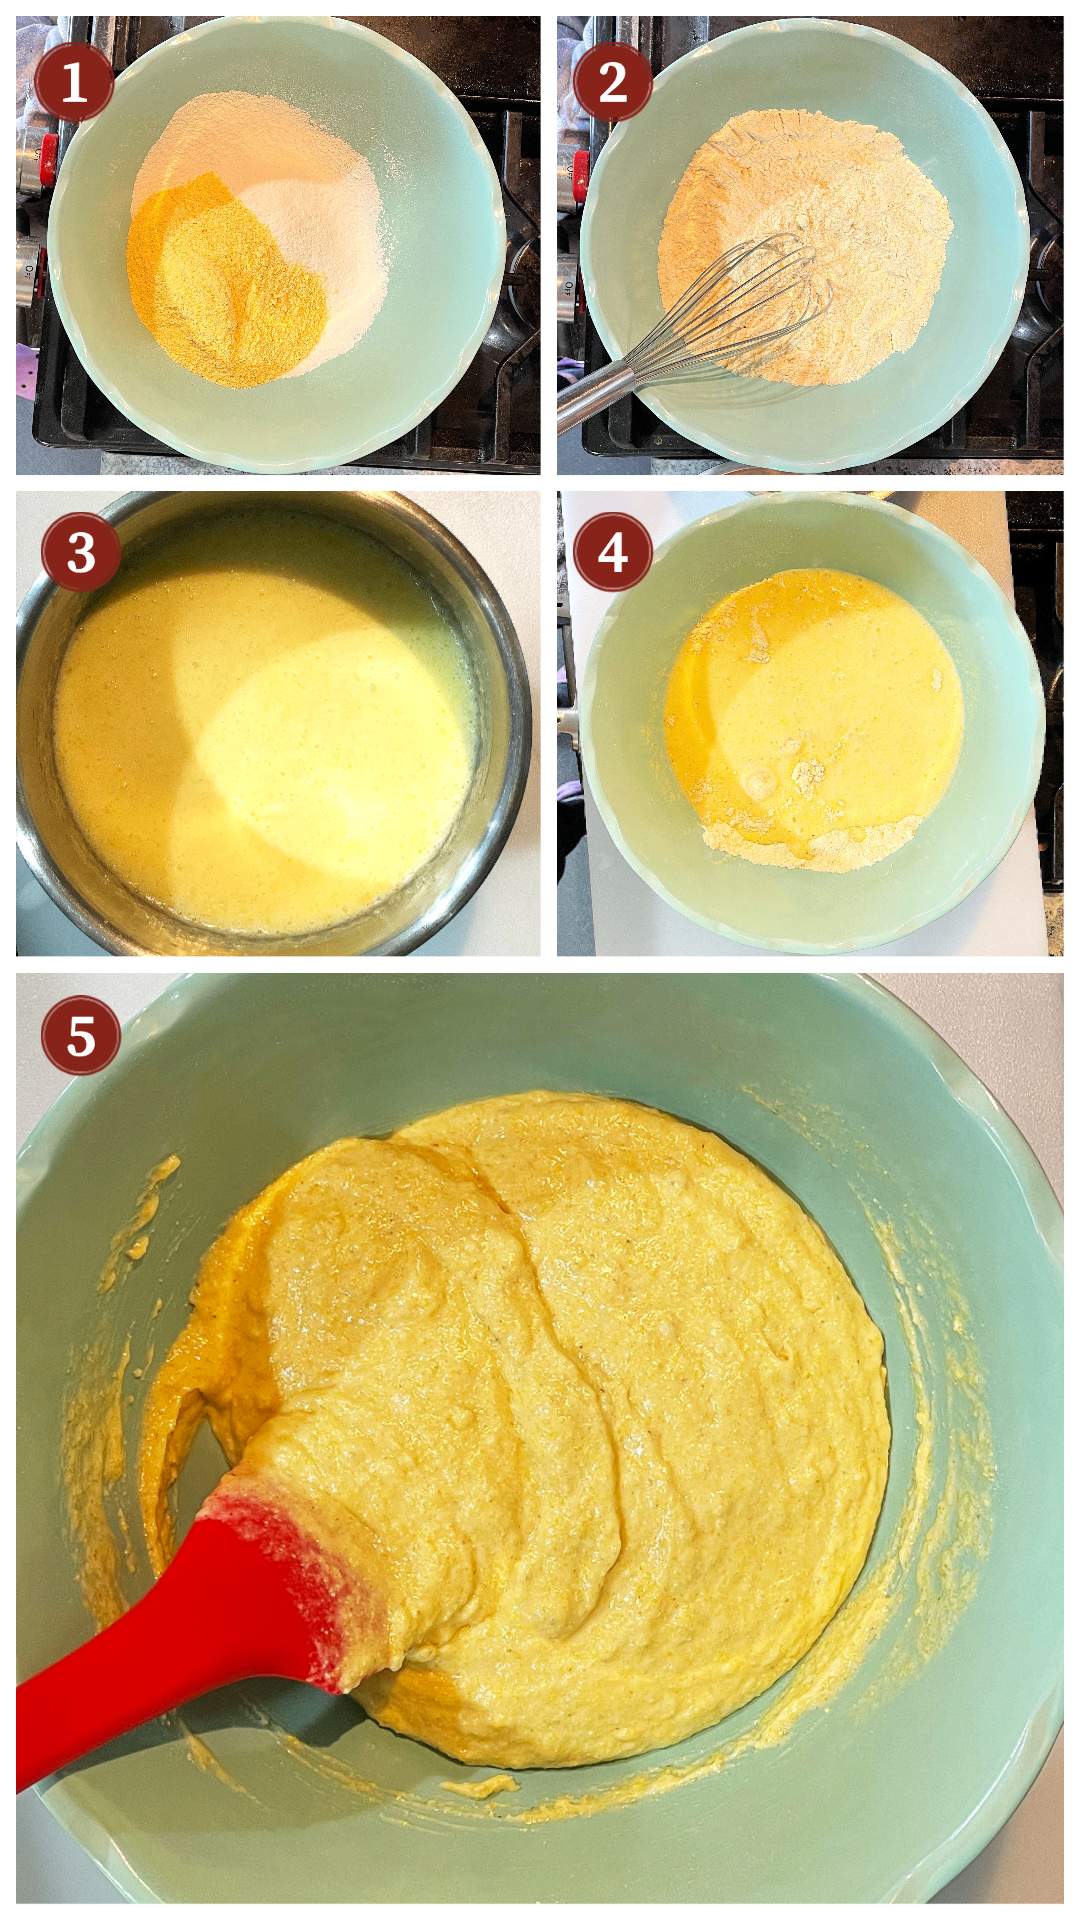 A collage of images showing how to mix up the batter for southern cornbread, steps 1 - 5.